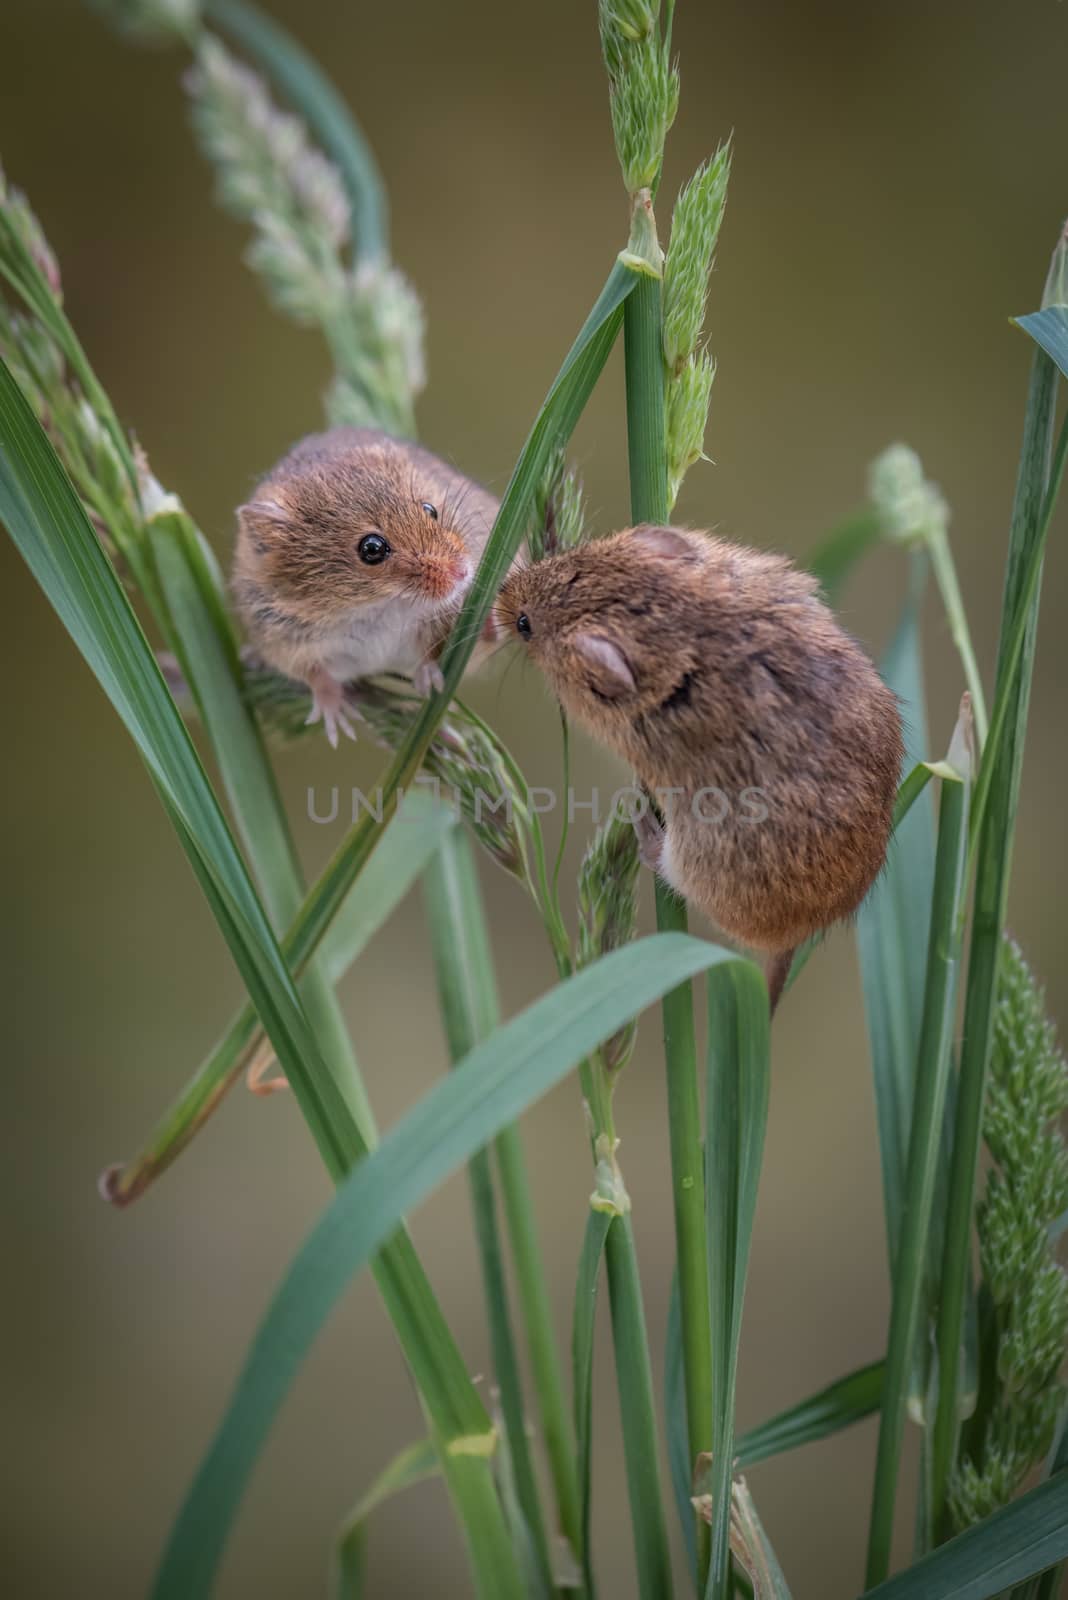 two harvest mice climbing up strands of grass and looking at each other in upright vertical format